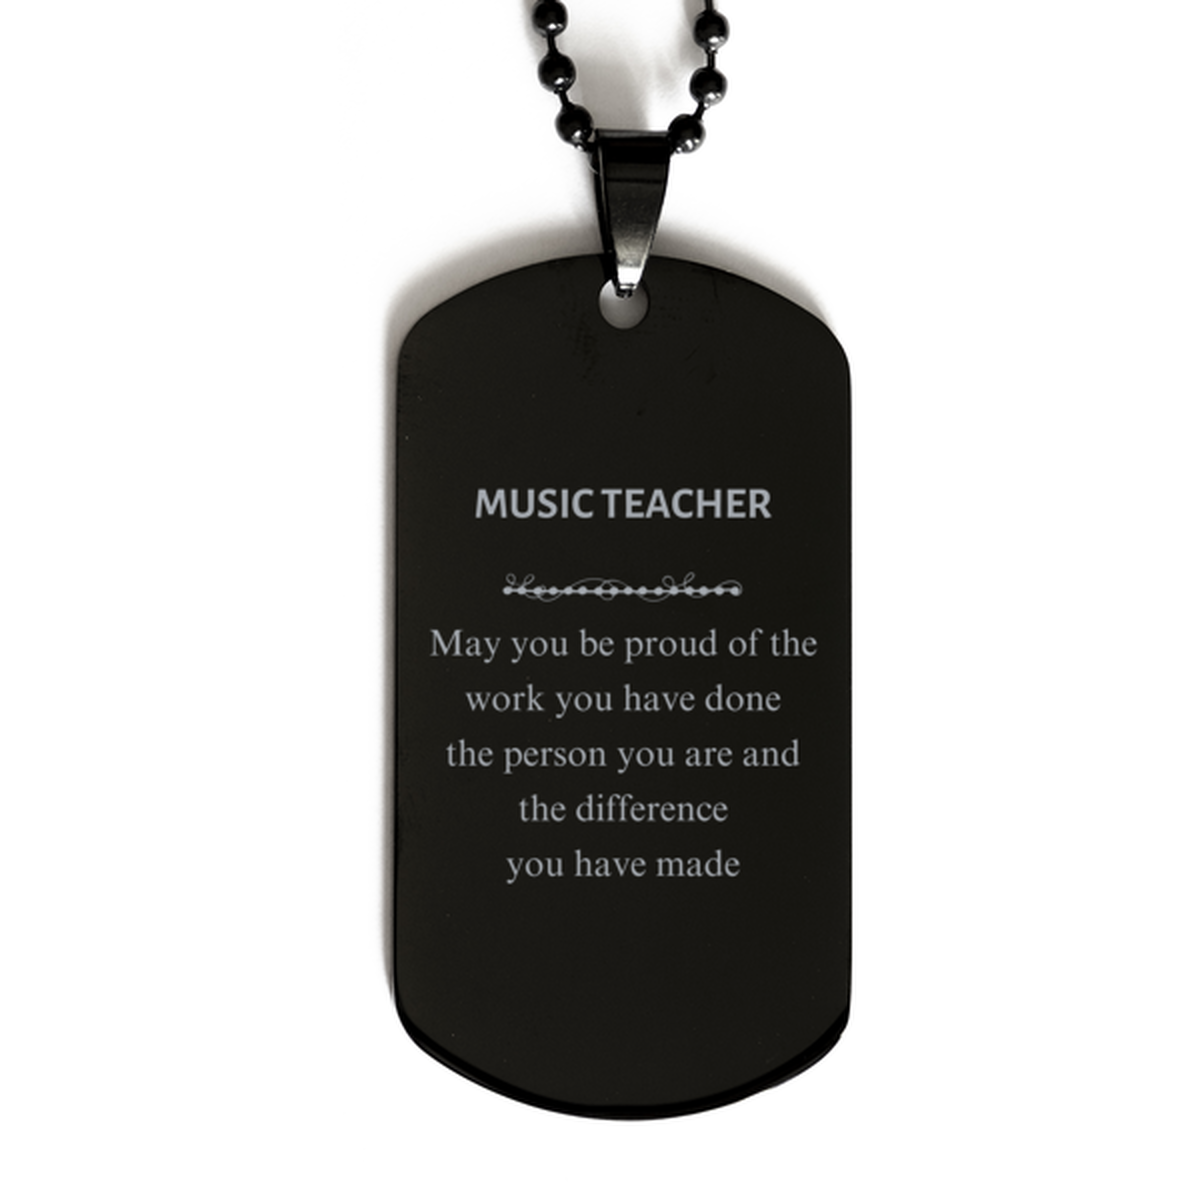 Music Teacher May you be proud of the work you have done, Retirement Music Teacher Black Dog Tag for Colleague Appreciation Gifts Amazing for Music Teacher